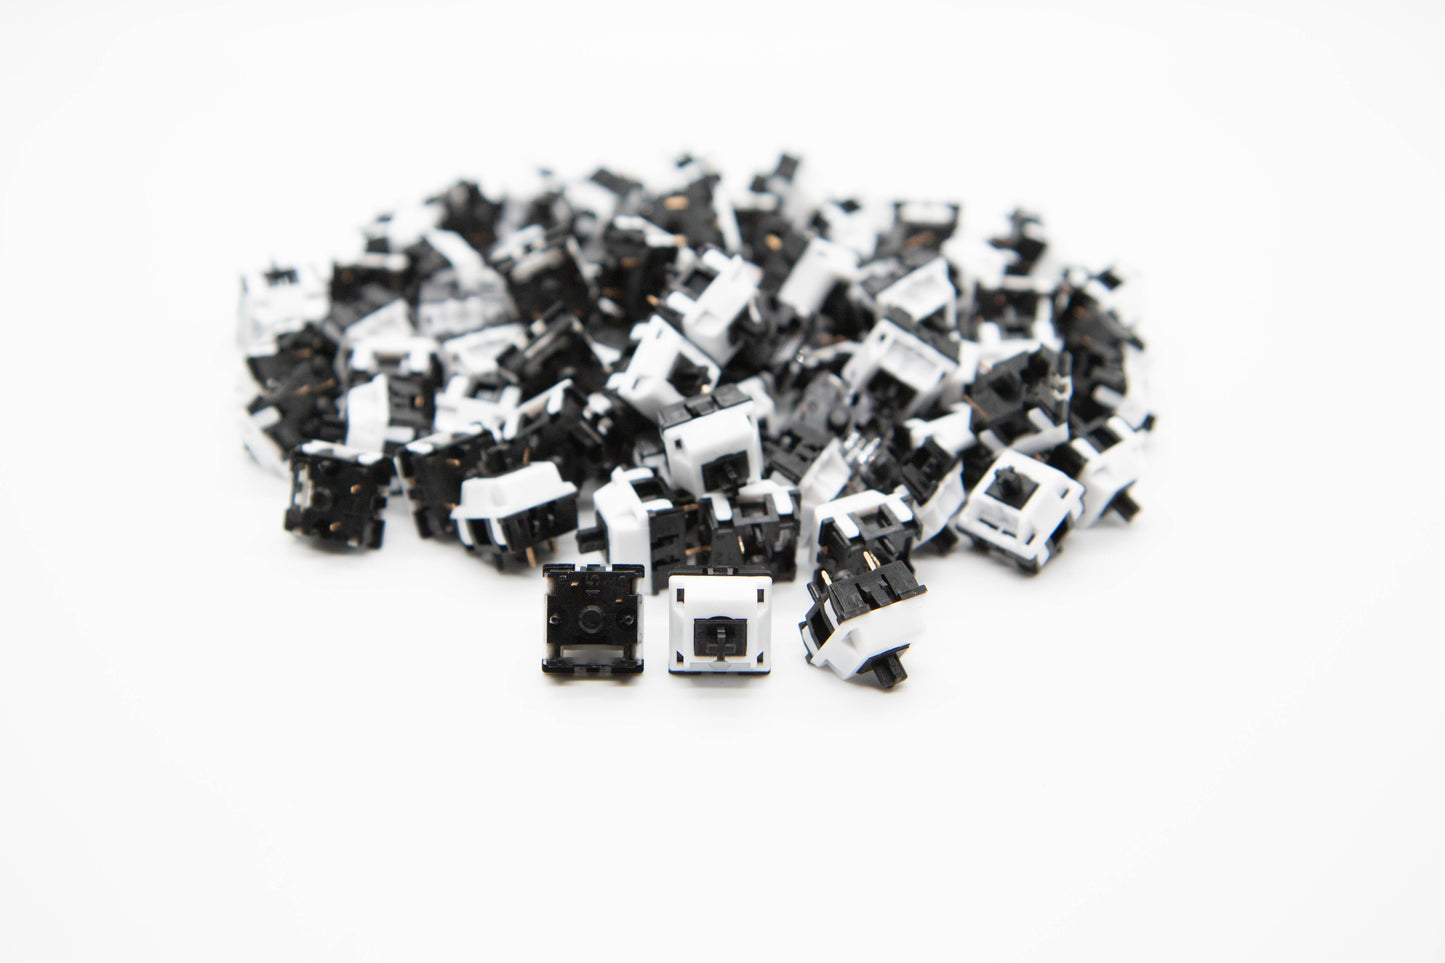 Close-up shot of a pile of KTT Monochrome Marble mechanical keyboard switches featuring black and white housing and black stems